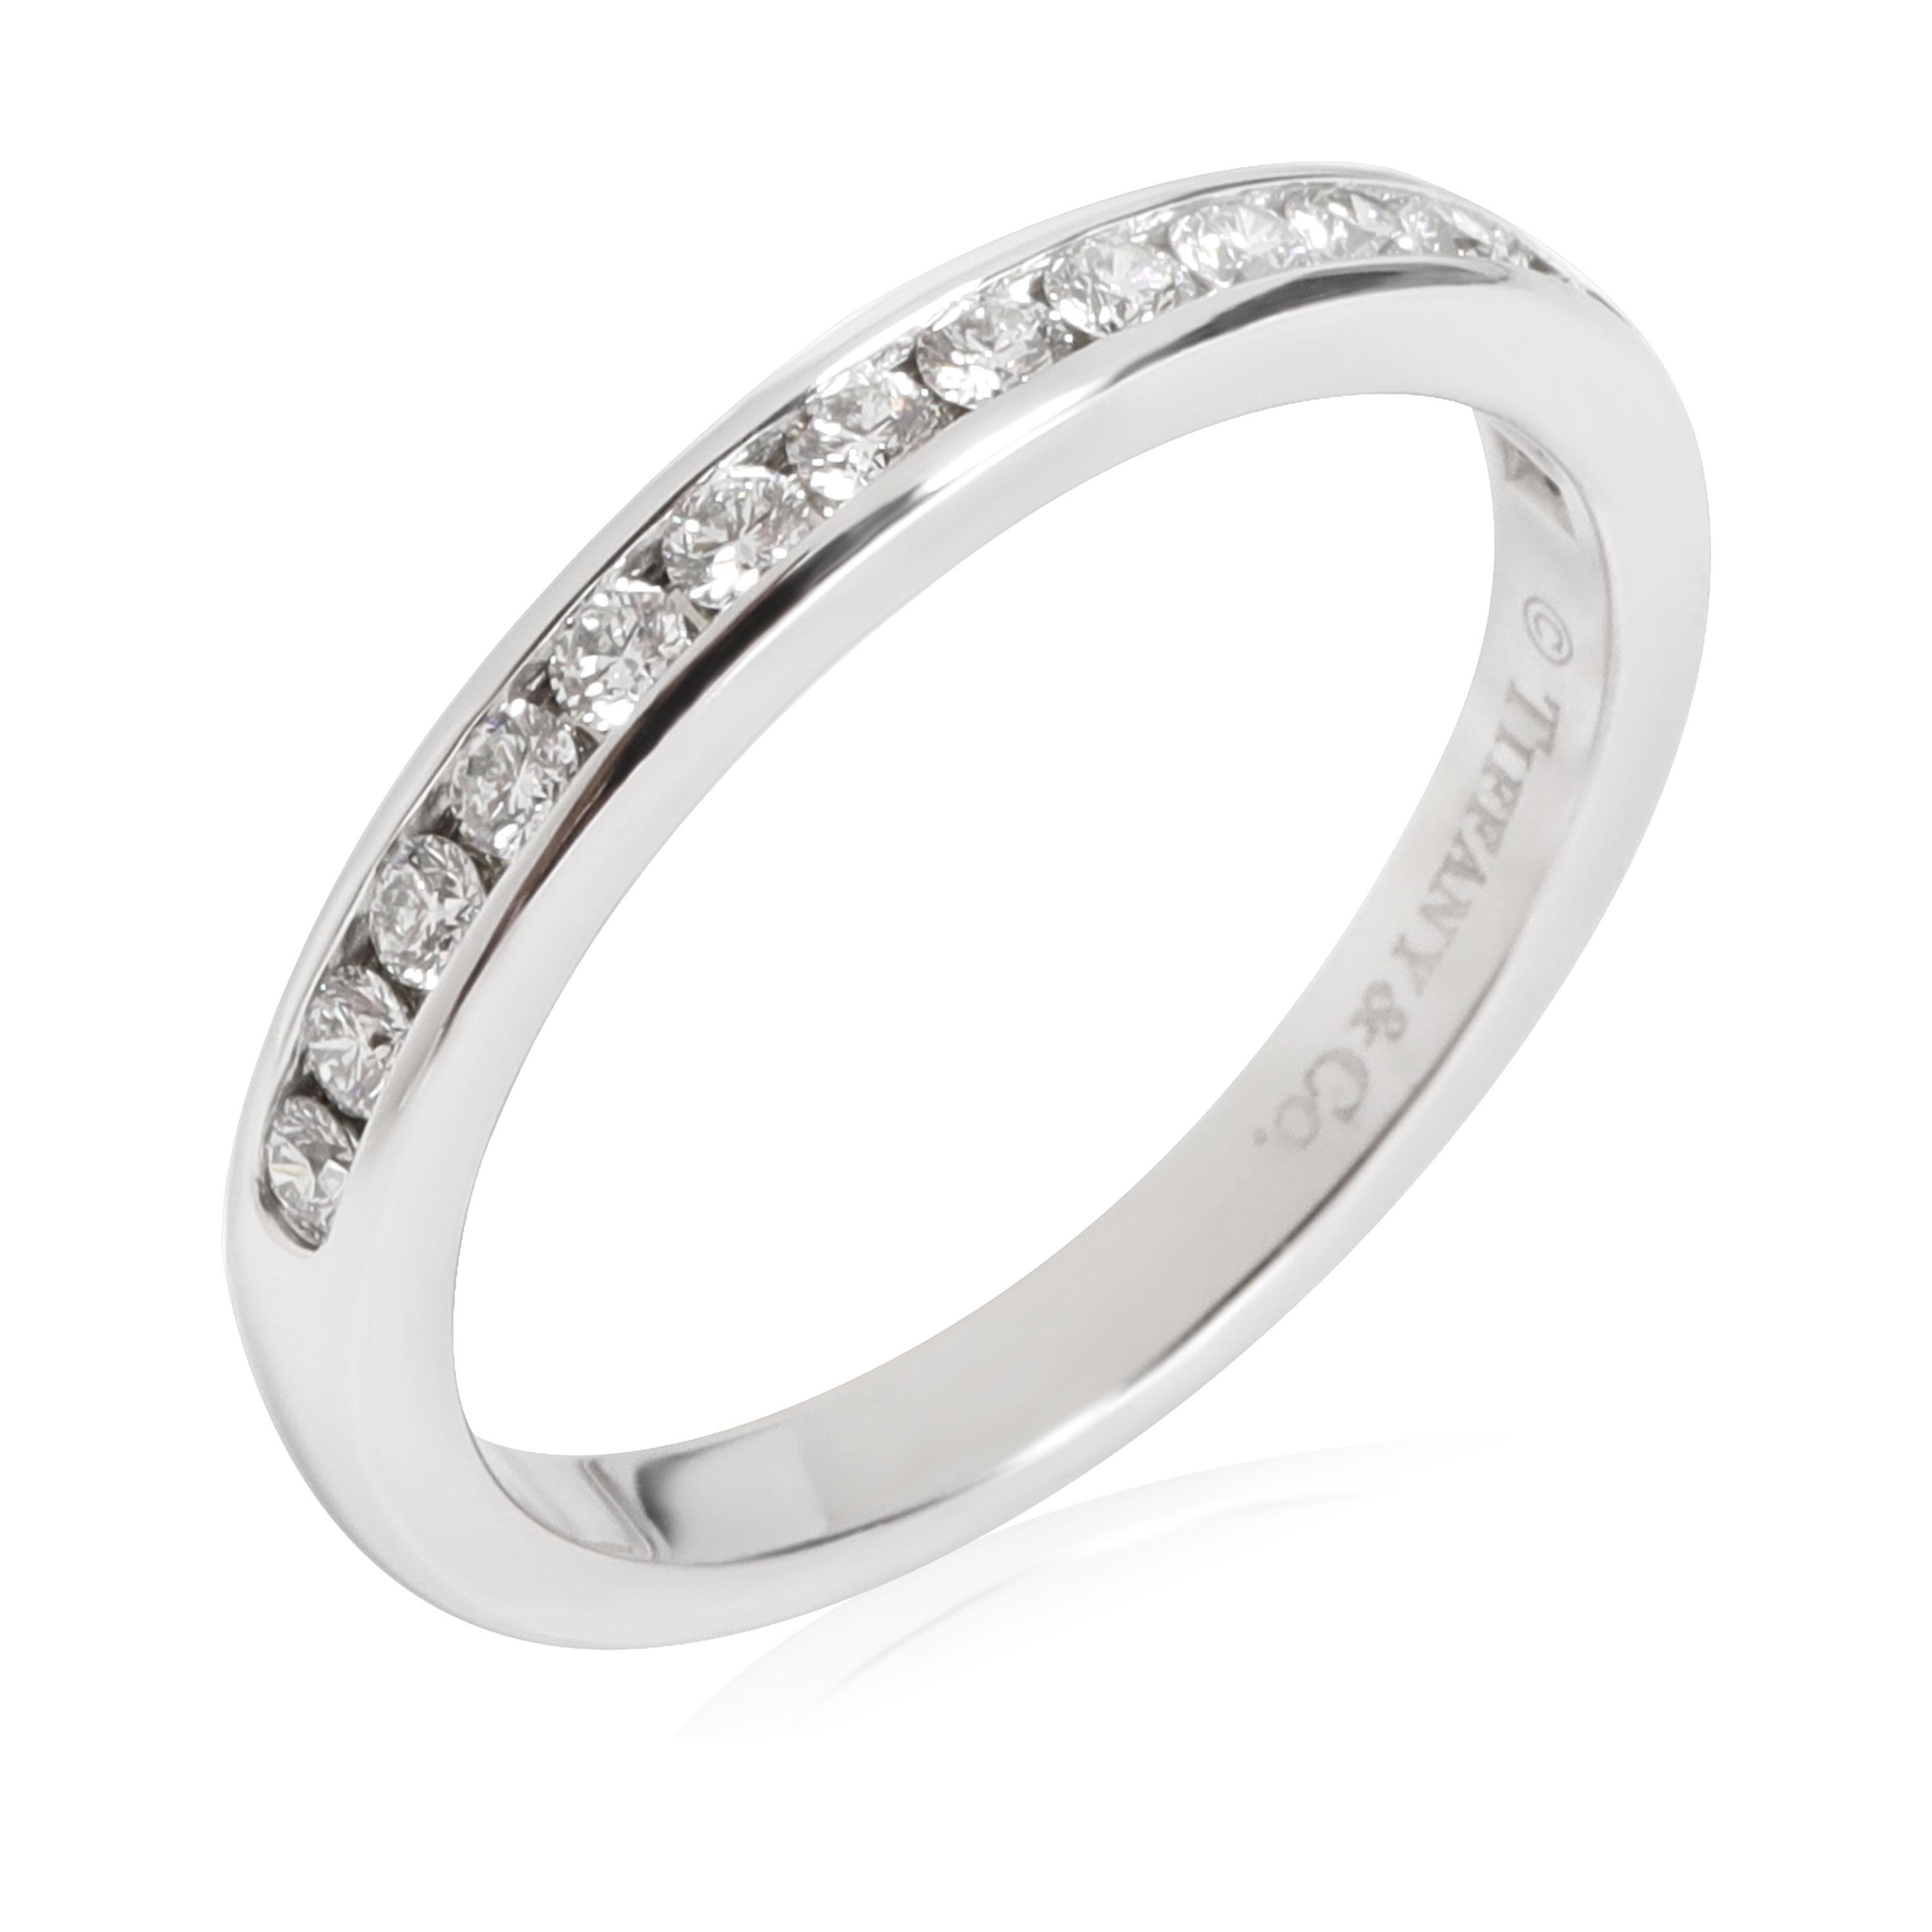 Tiffany & Co. Channel Diamond Wedding Band in Platinum 0.24 CTW

PRIMARY DETAILS
SKU: 115565
Listing Title: Tiffany & Co. Channel Diamond Wedding Band in Platinum 0.24 CTW
Condition Description: Retails for 3000 USD. In excellent condition and